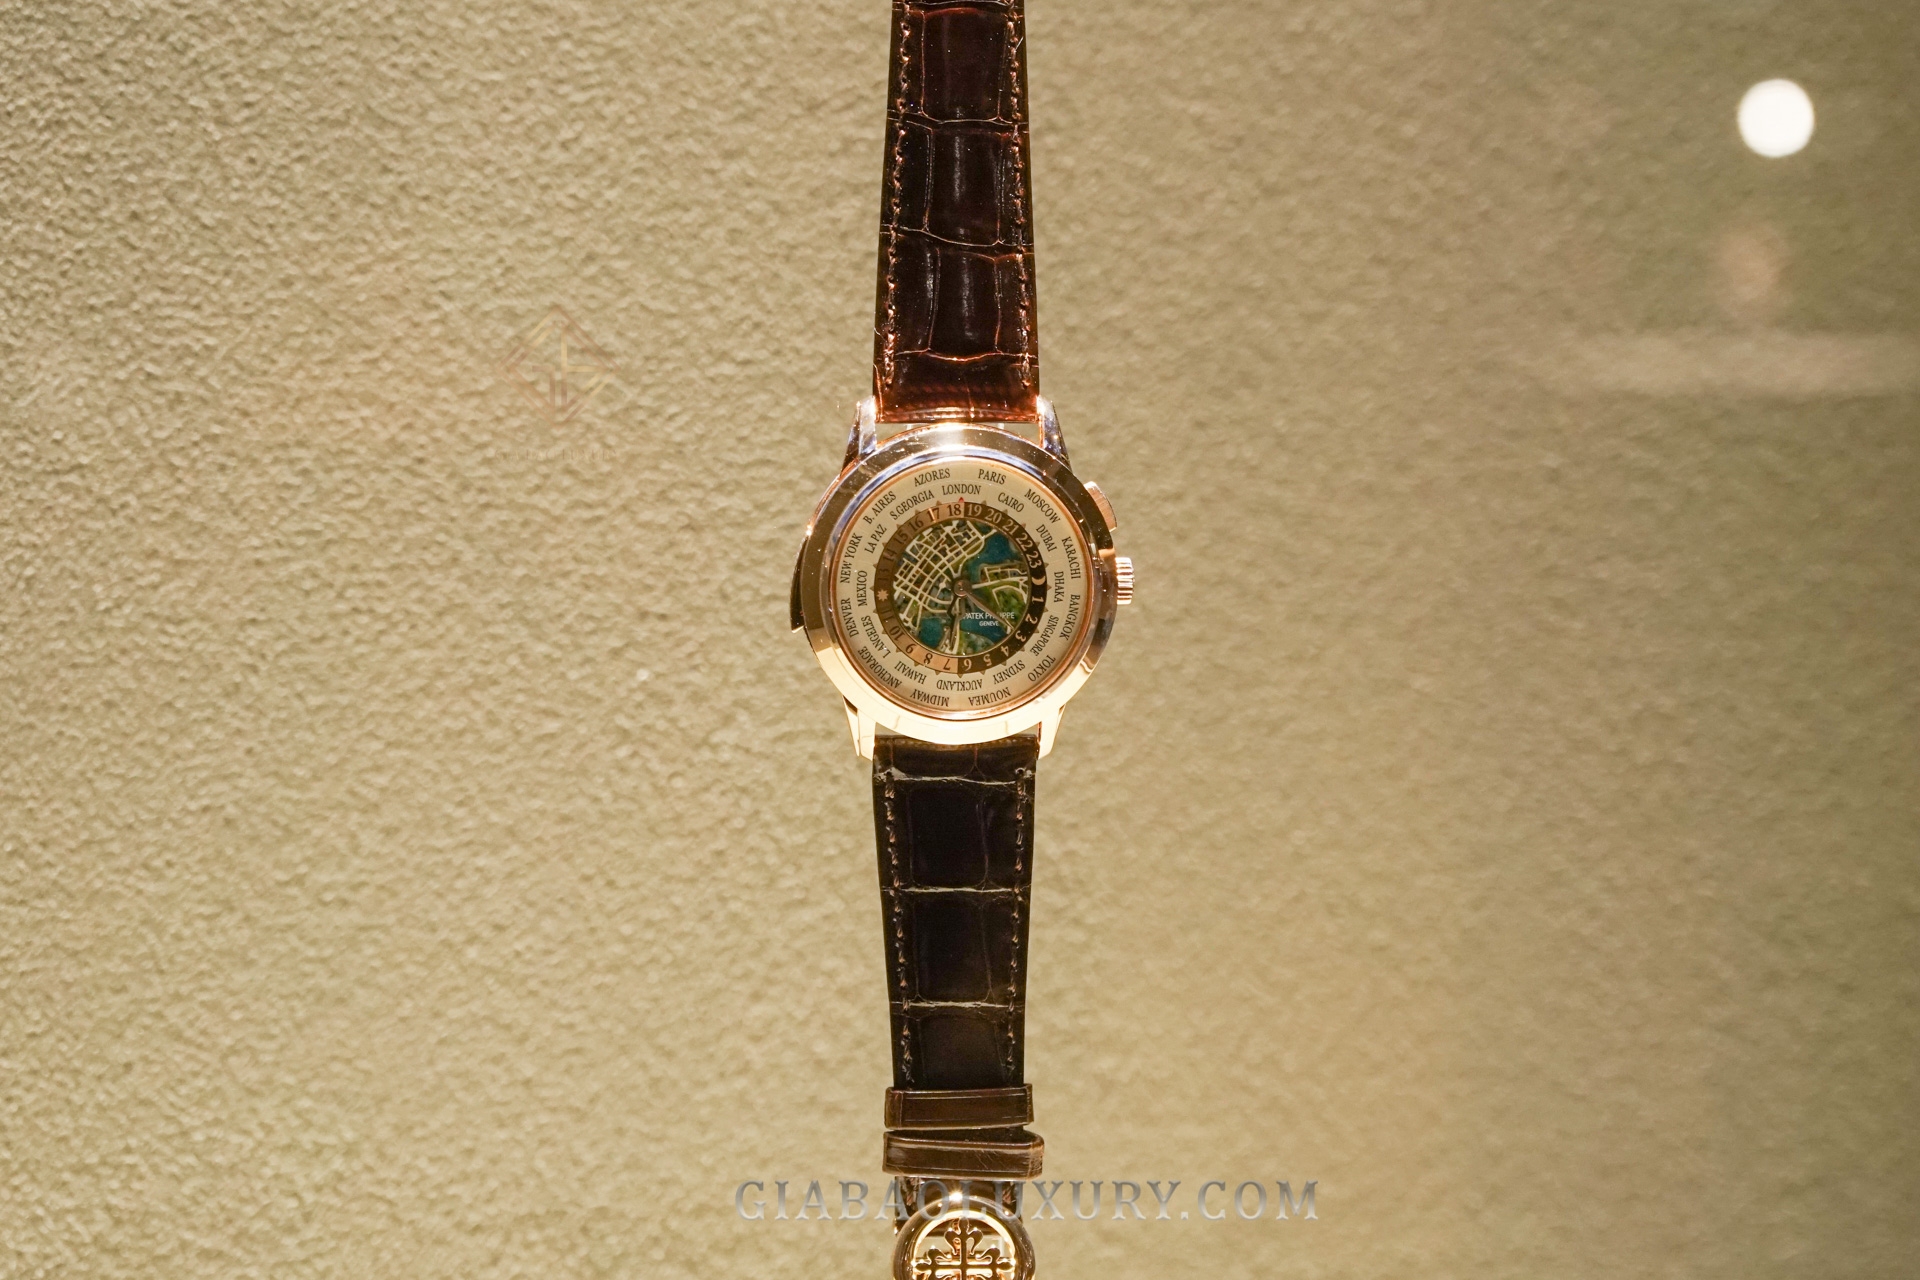 Patek Philippe World Time Minute Repeater ref. 5531R-010 Singapore 2019